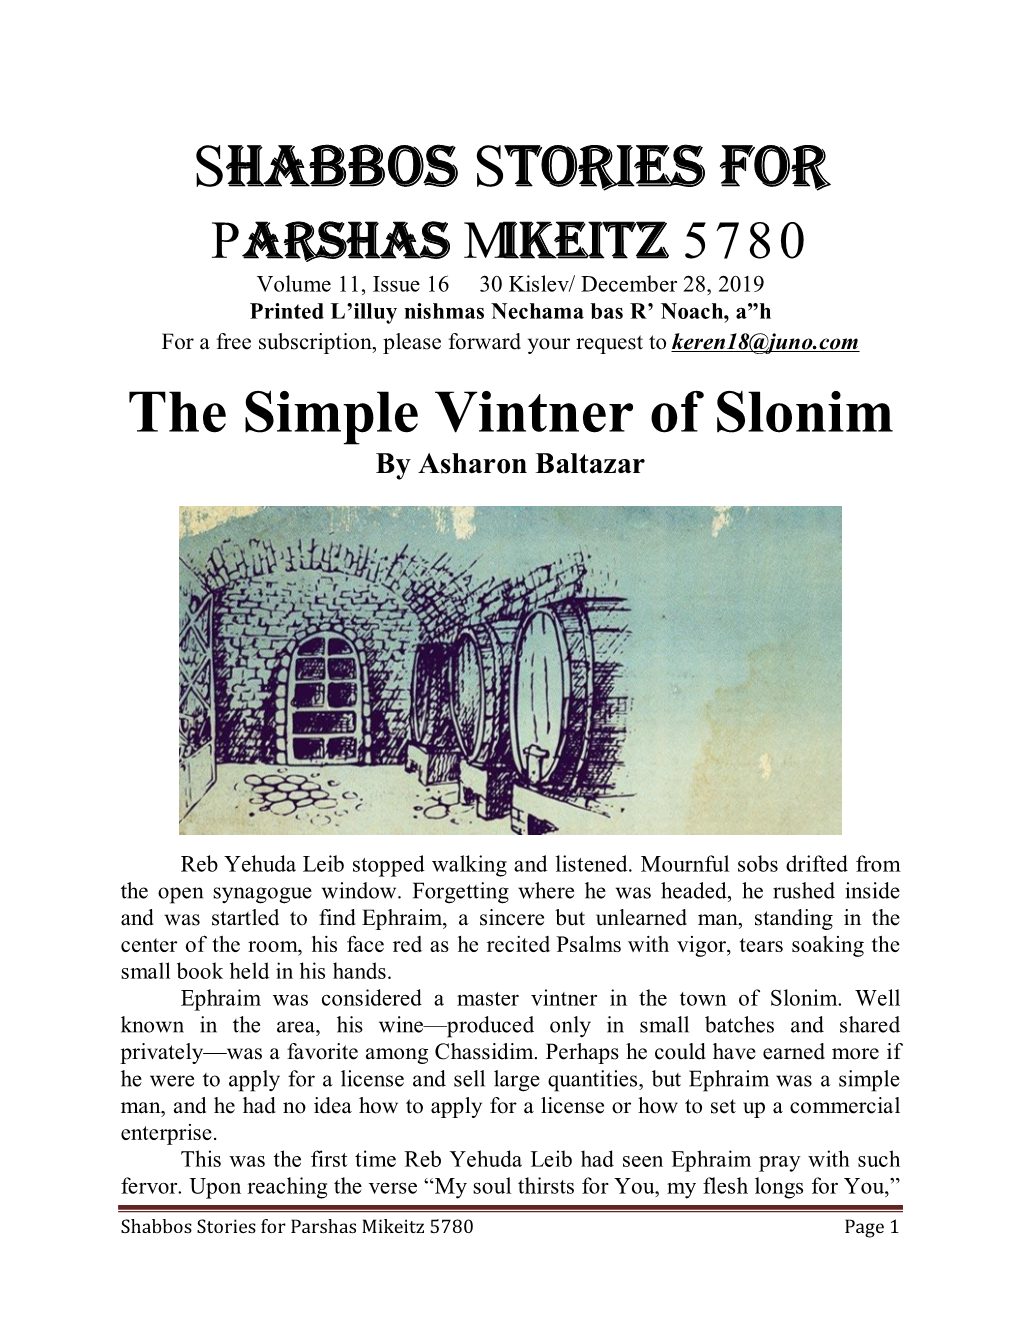 Shabbos Stories for Parshas Mikeitz 5780 Volume 11, Issue 16 30 Kislev/ December 28, 2019 Printed L’Illuy Nishmas Nechama Bas R’ Noach, A”H